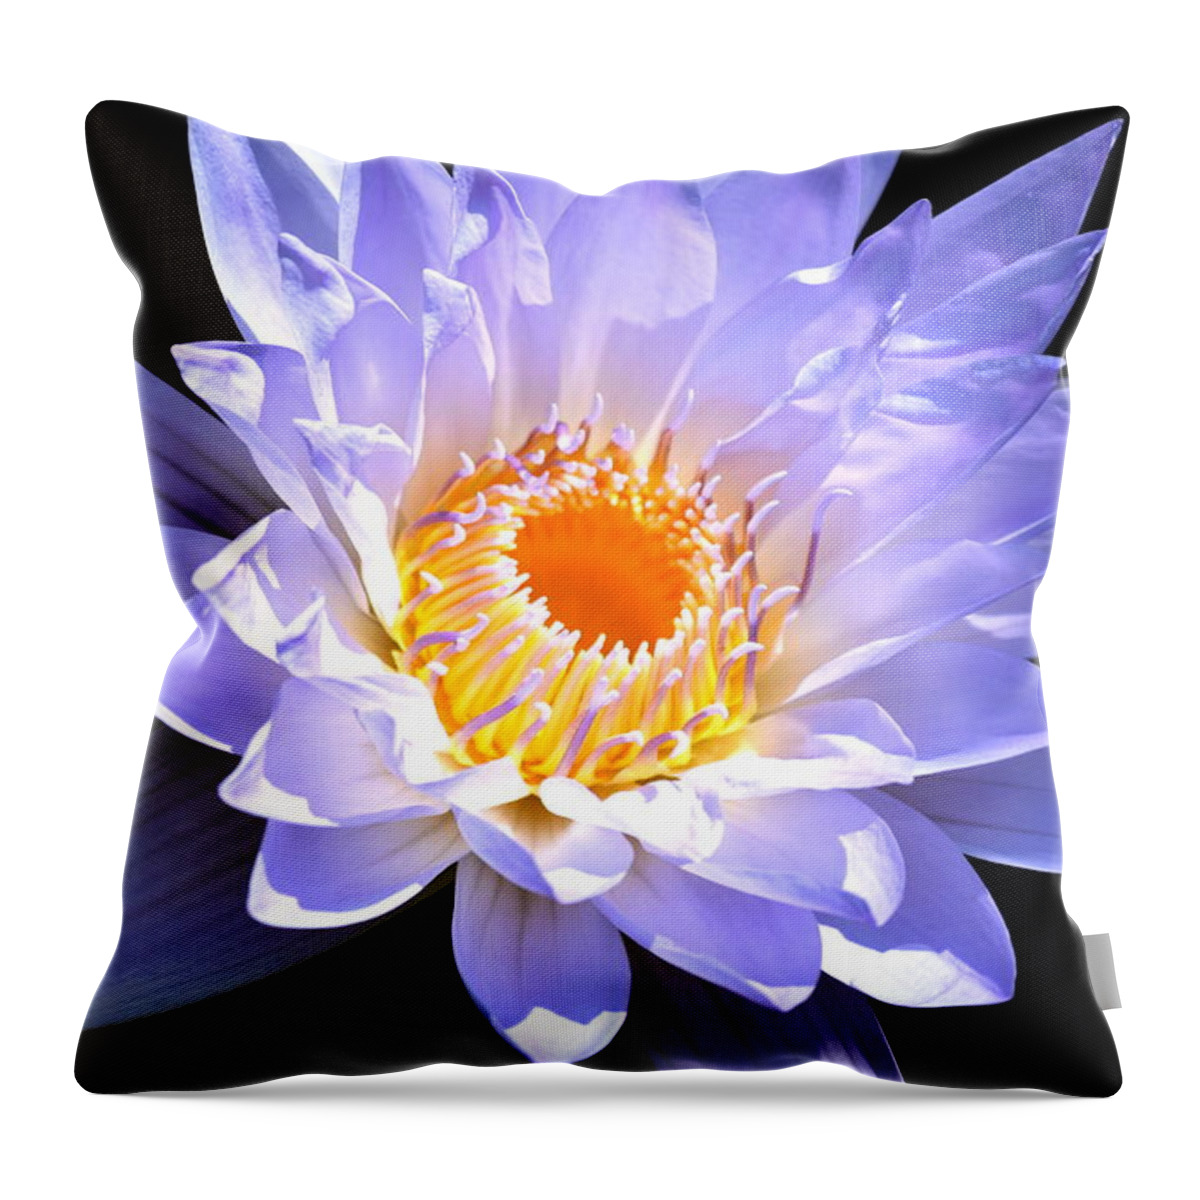 Lily Throw Pillow featuring the photograph Internal Passion by Deborah Crew-Johnson